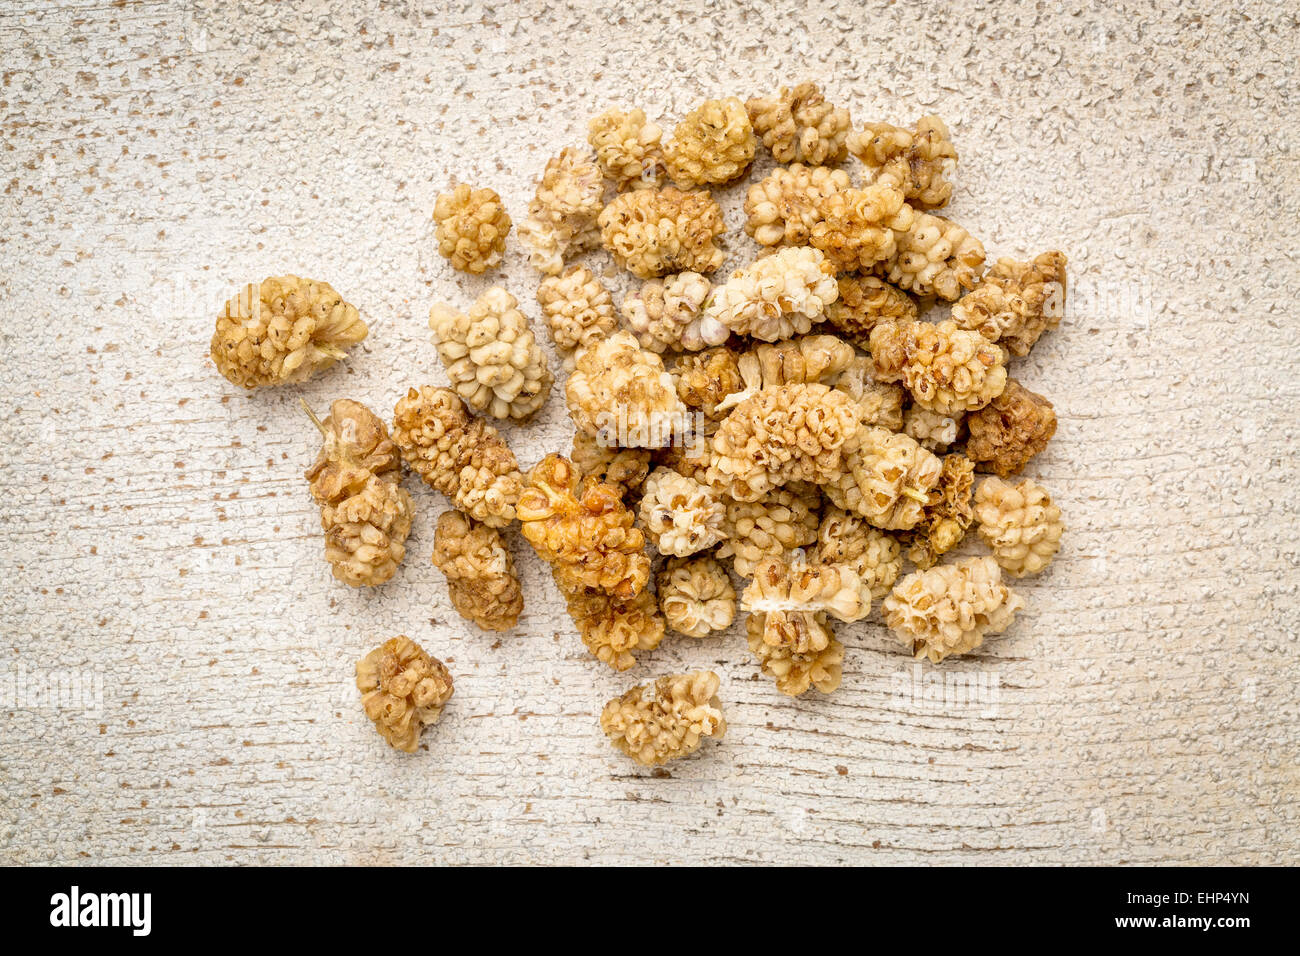 a pile of dried white mulberry fruit against rustic barn wood Stock Photo